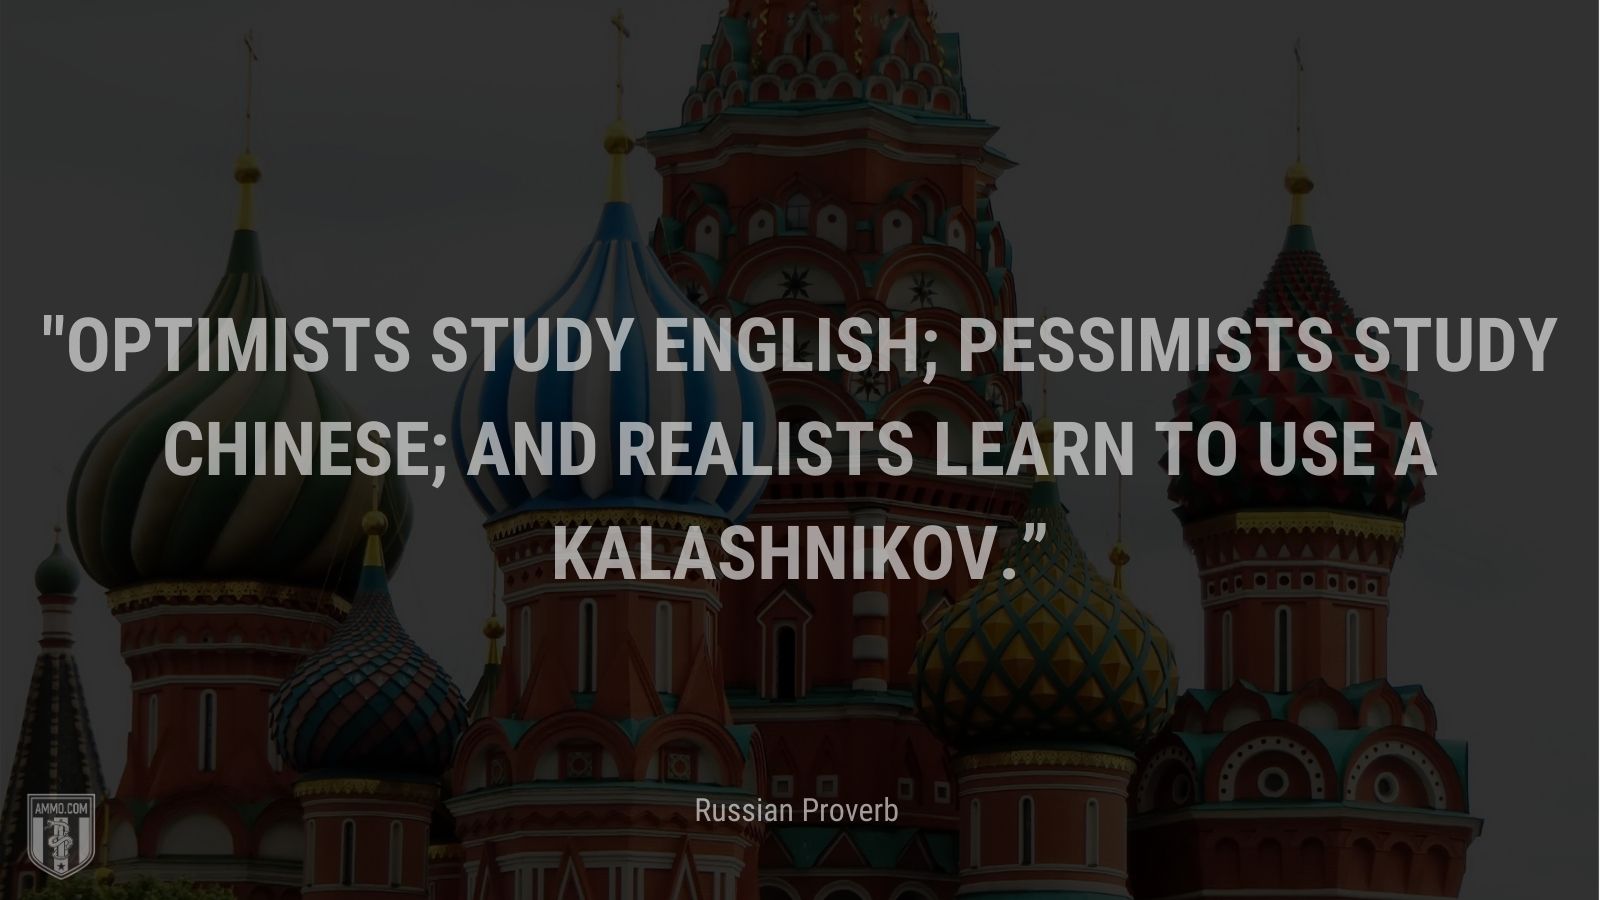 “Optimists study English; pessimists study Chinese; and realists learn to use a Kalashnikov.” - Russian Proverb